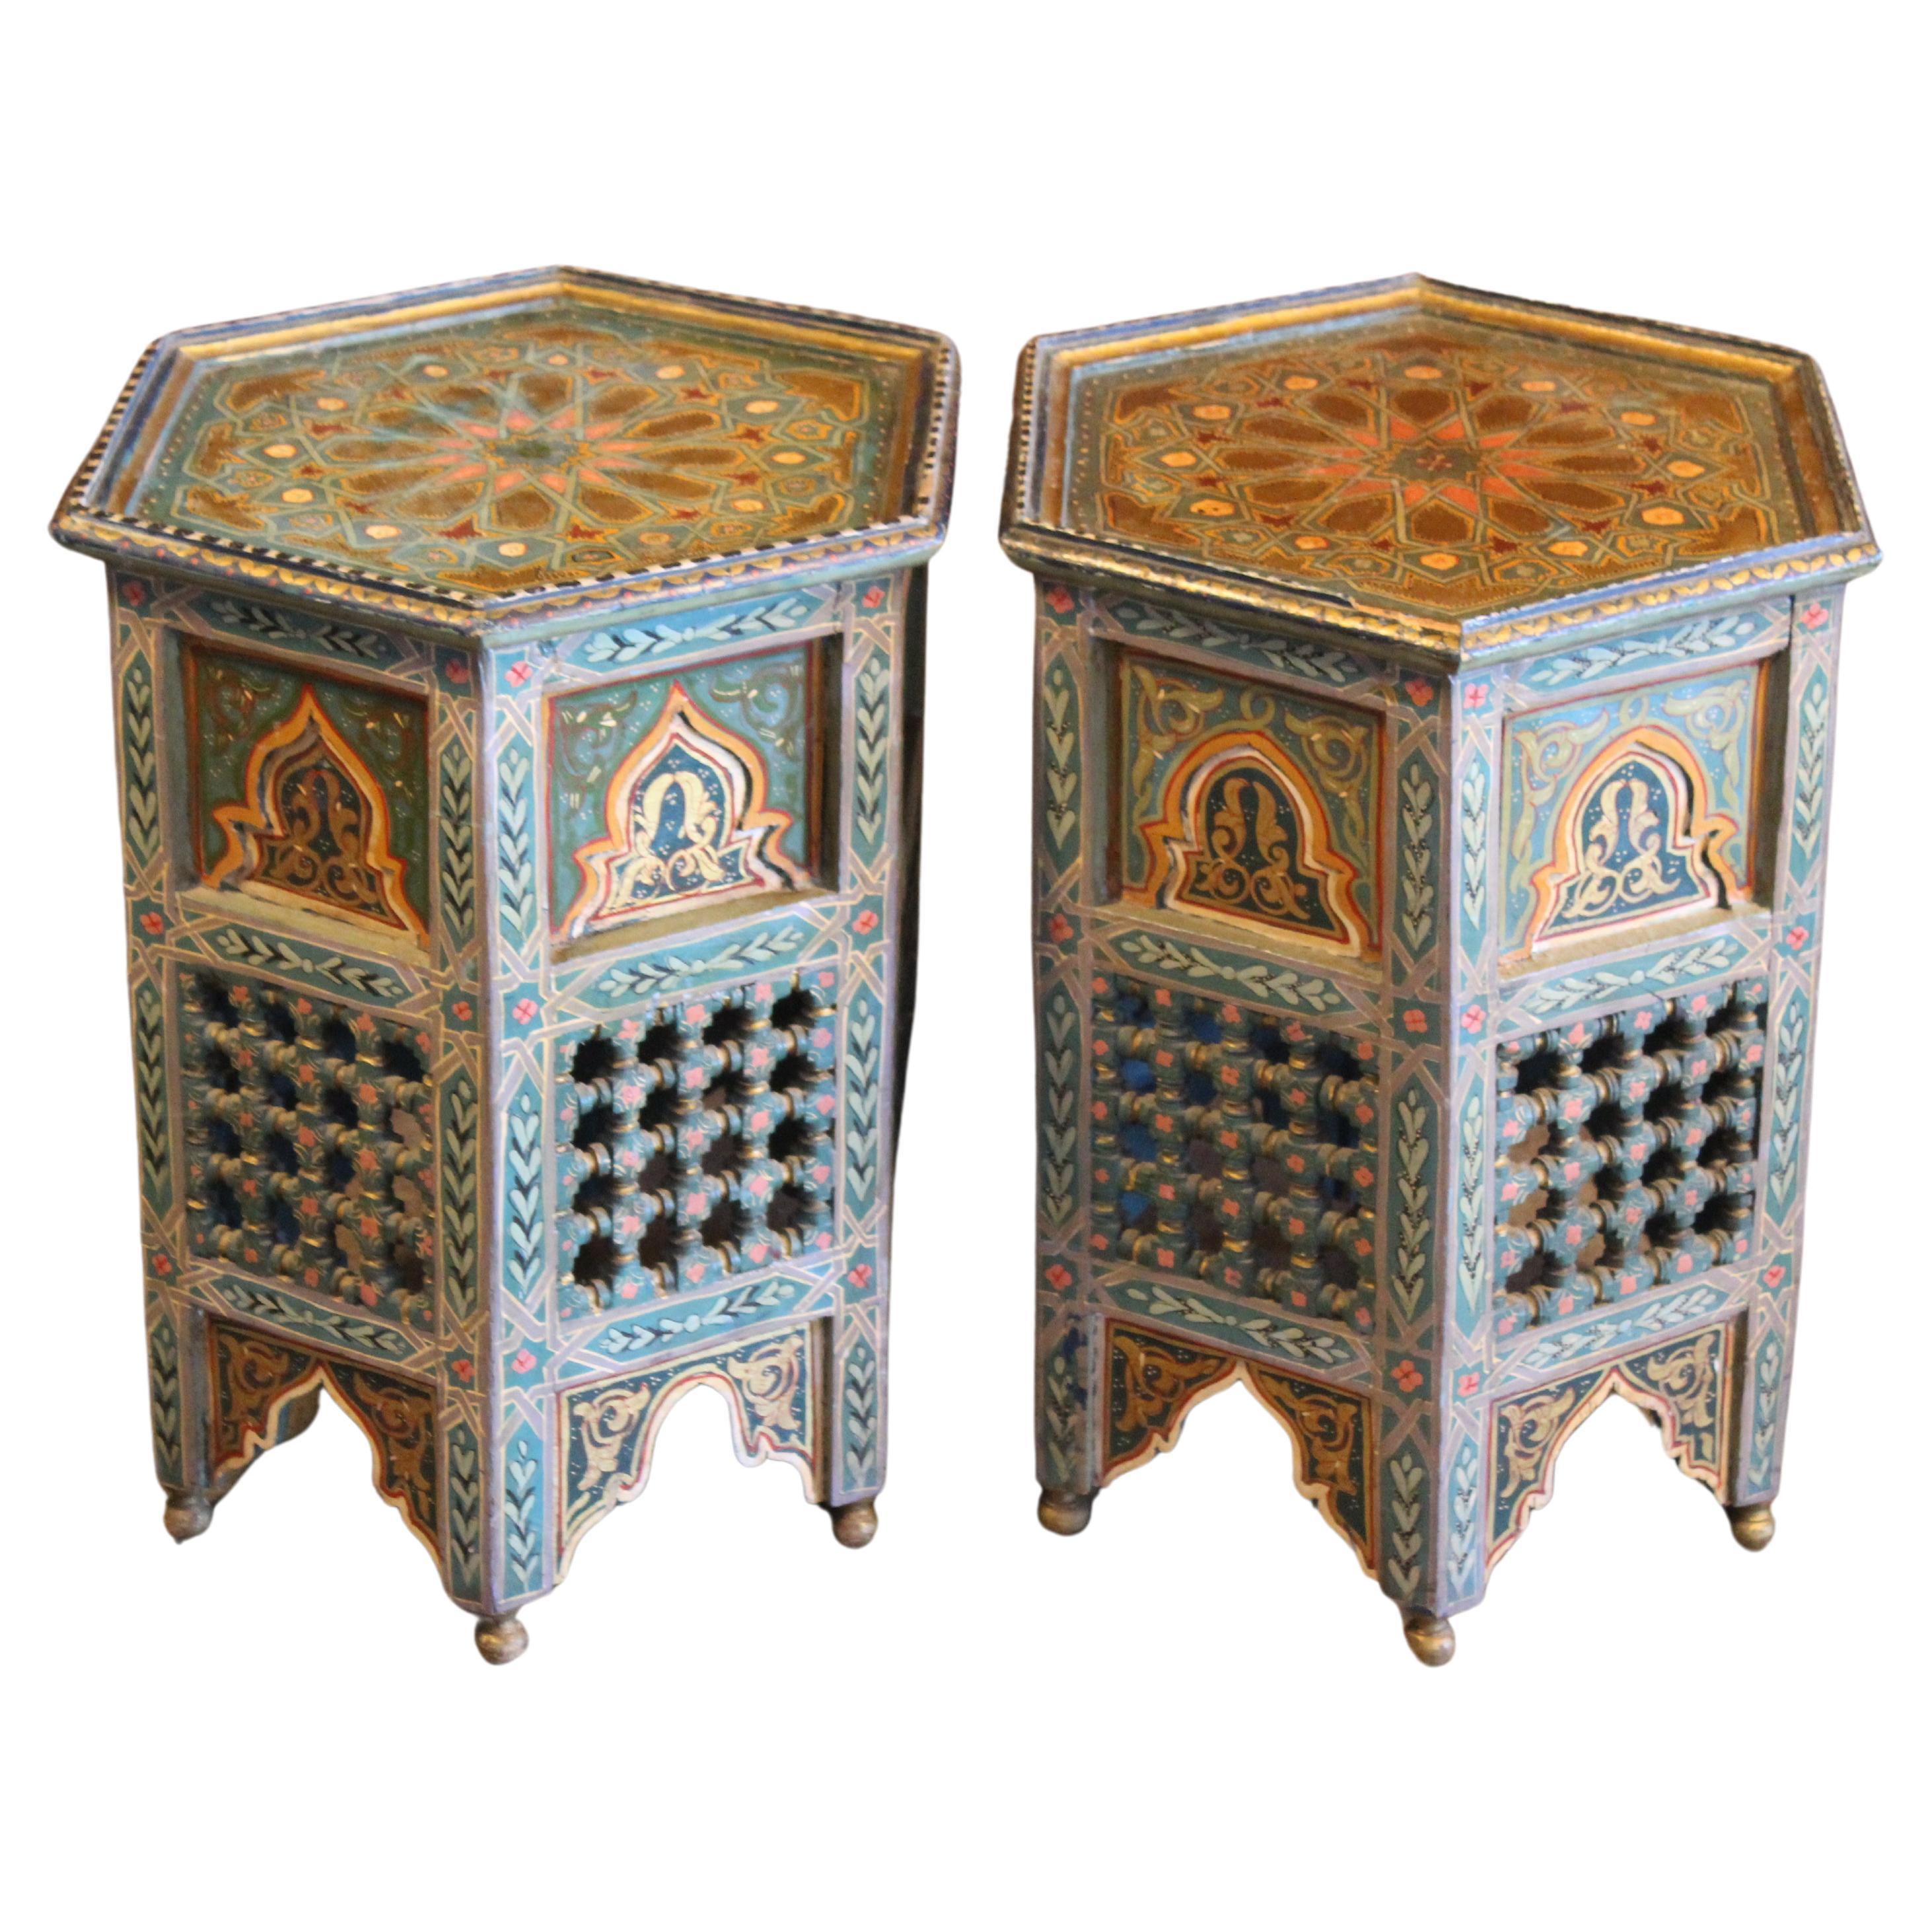 Pair of Vintage Hand-Painted Moroccan Side Tables